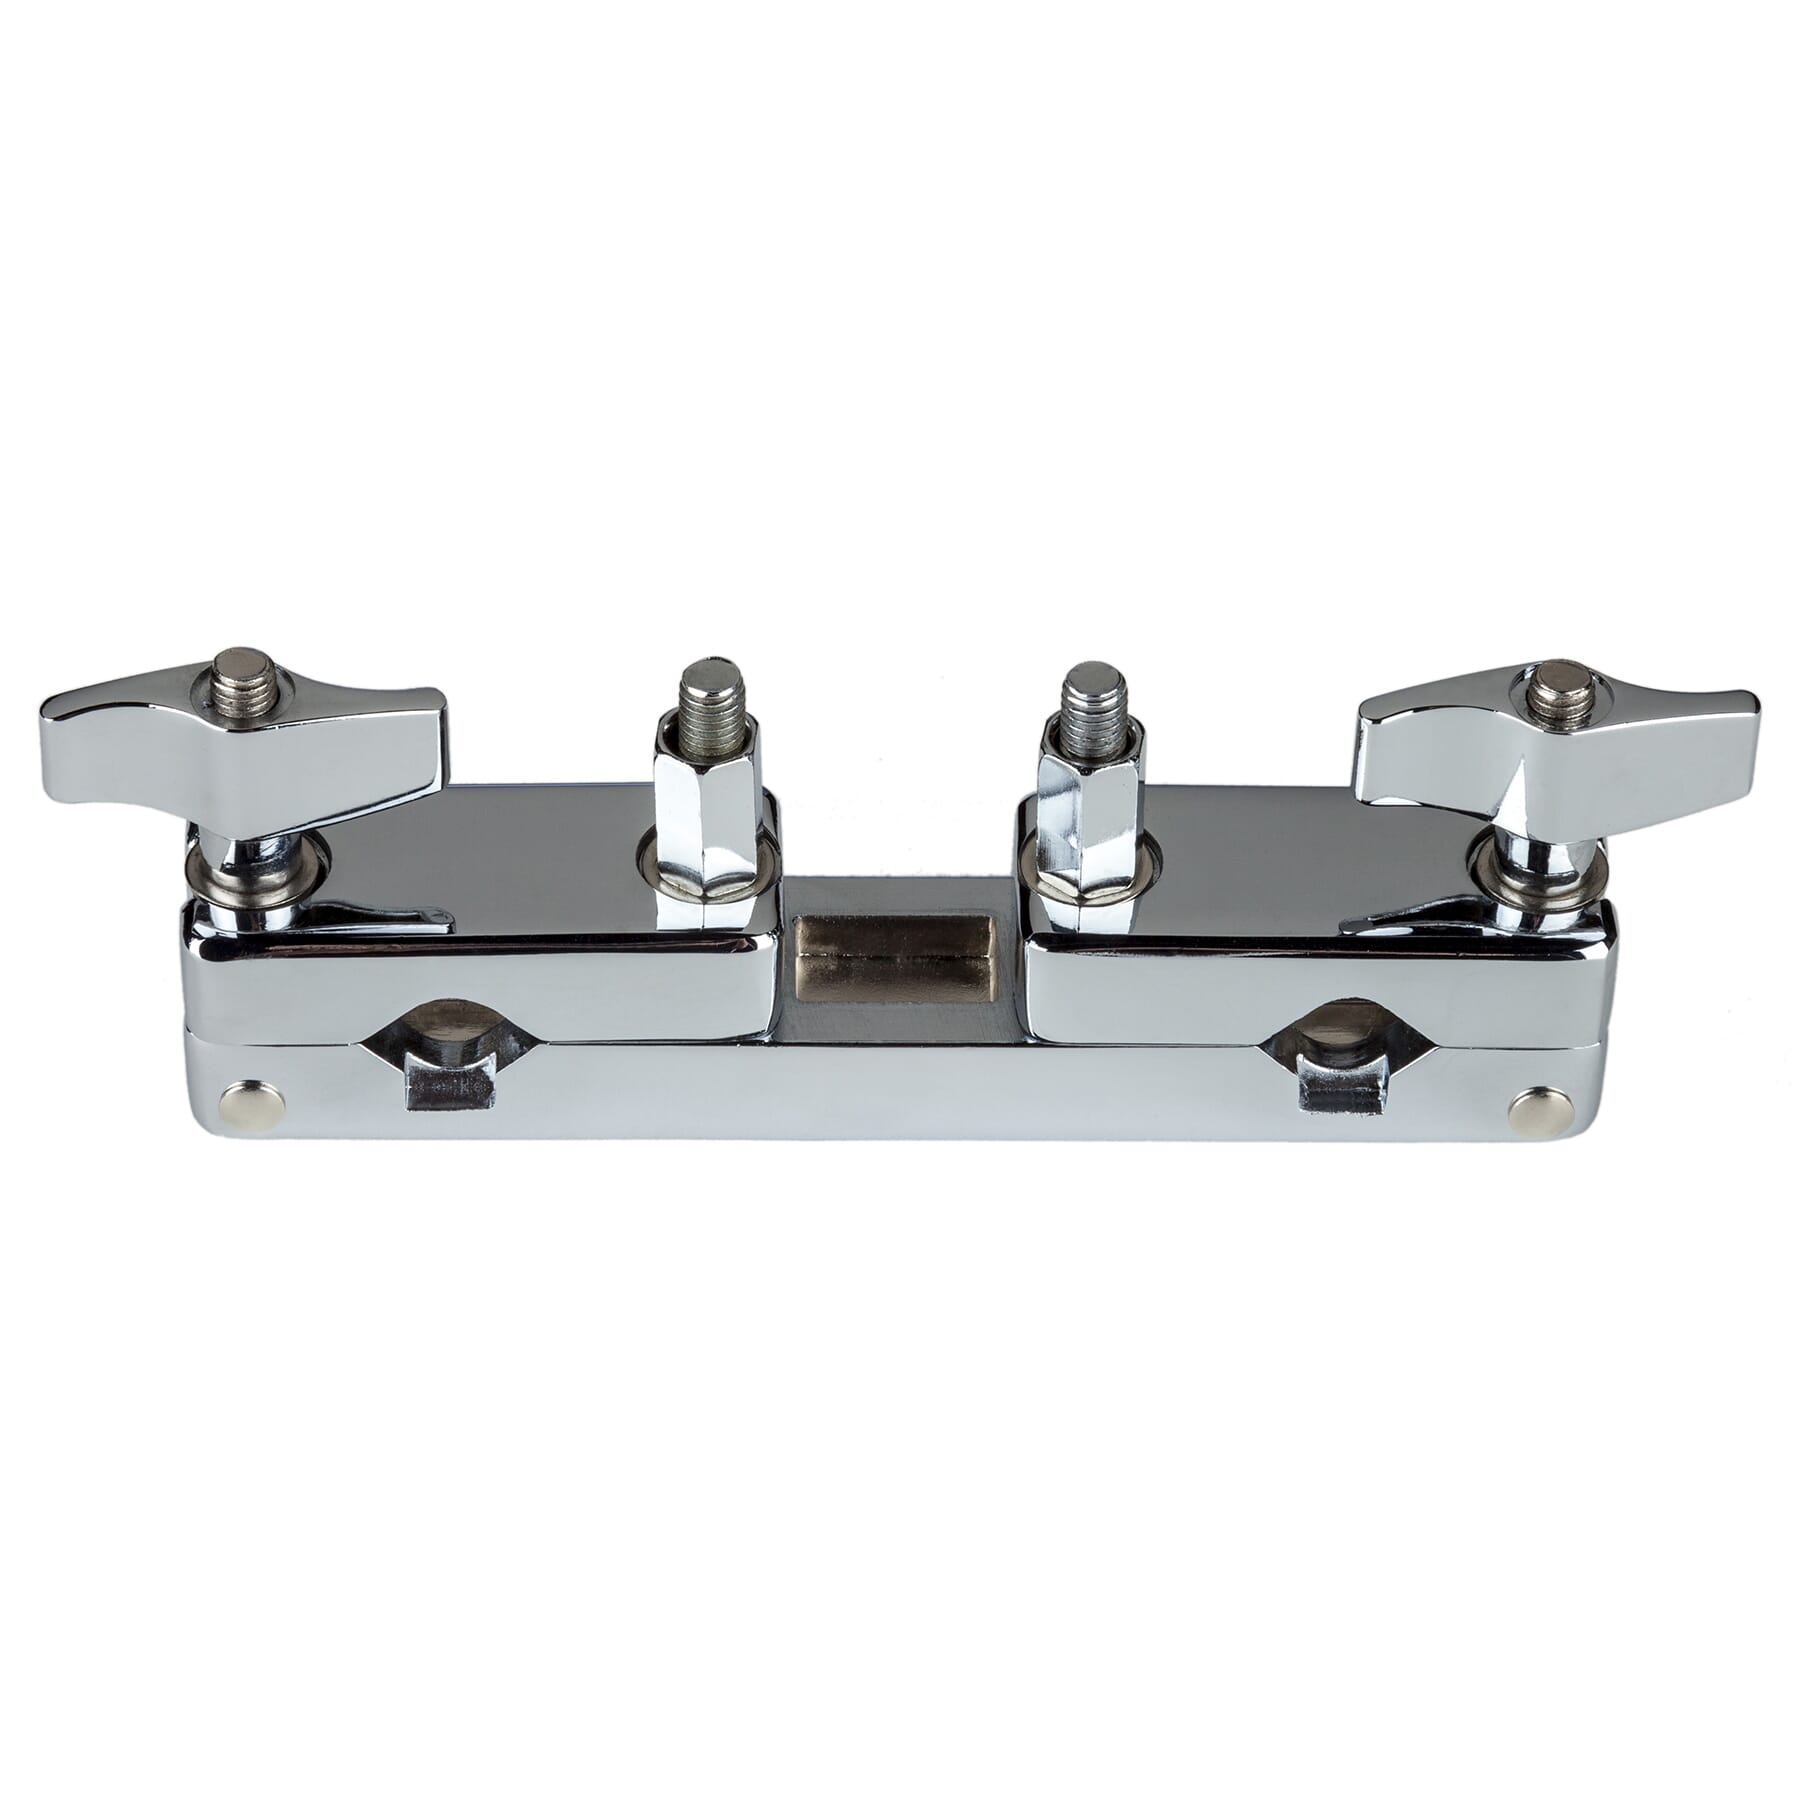 RX series two sided clamp